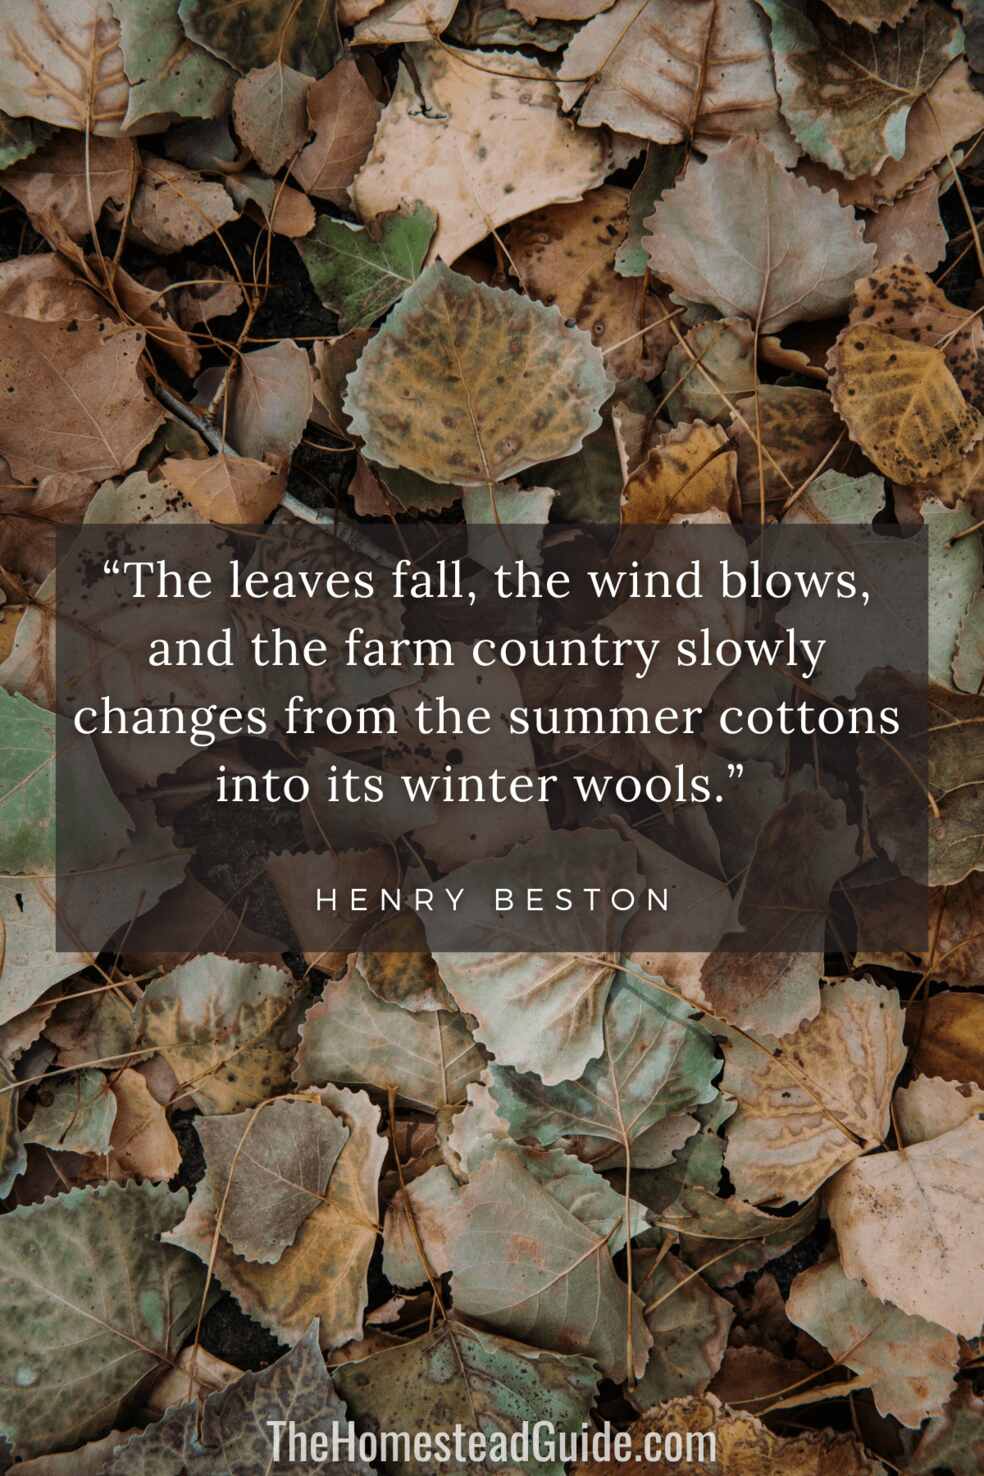 The leaves fall, the wind blows, and the farm country slowly changes from the summer cottons into its winter wools.